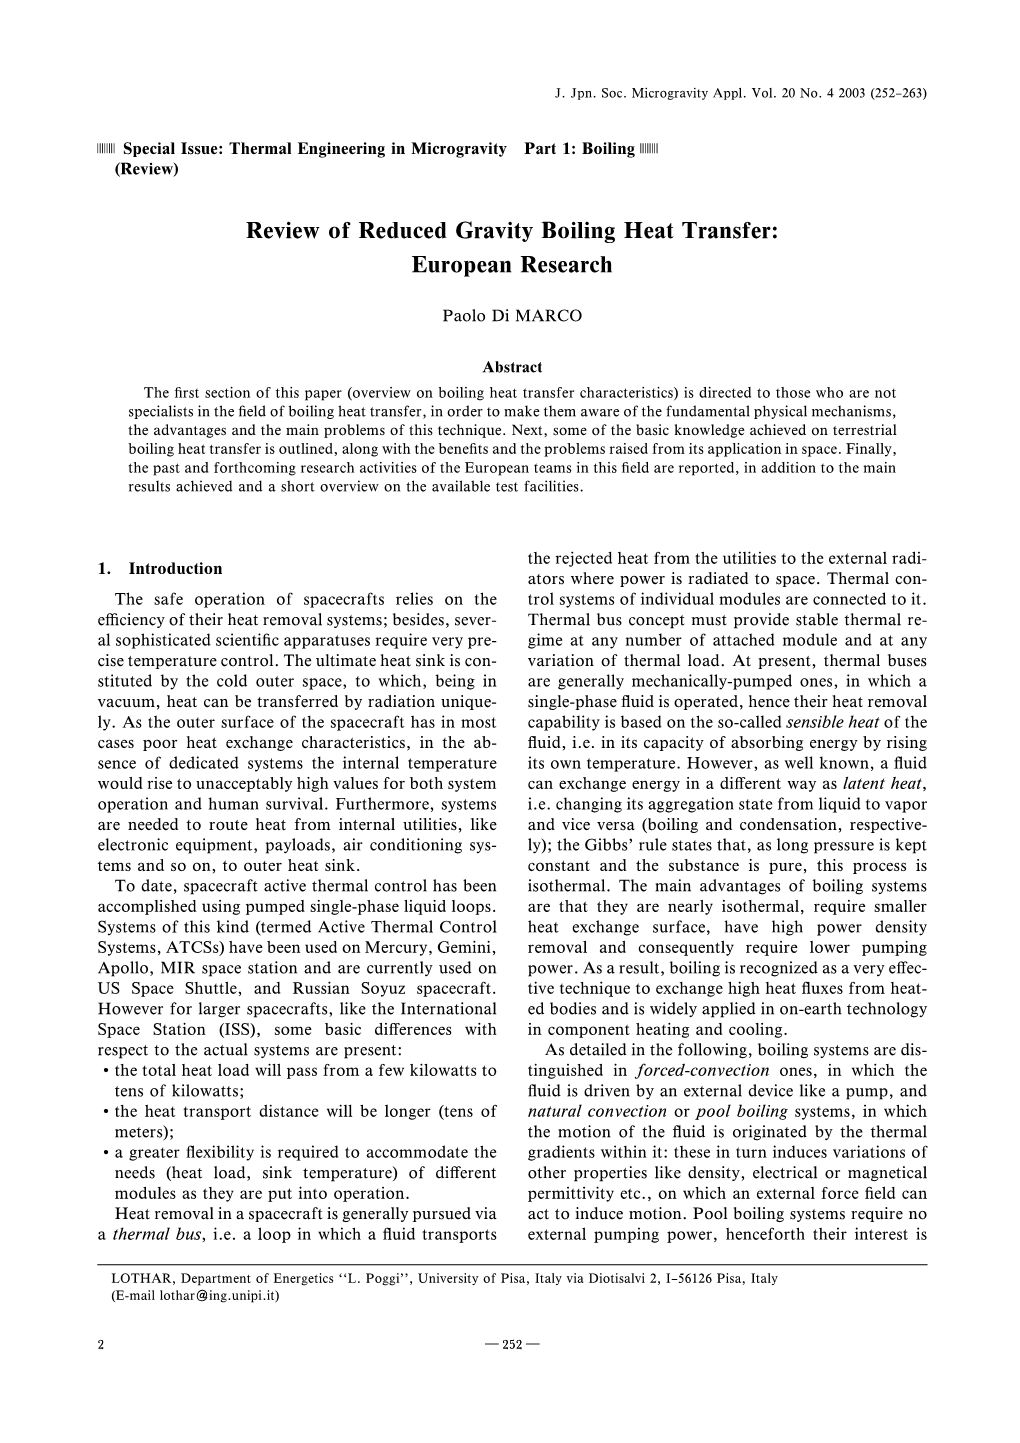 Review of Reduced Gravity Boiling Heat Transfer: European Research